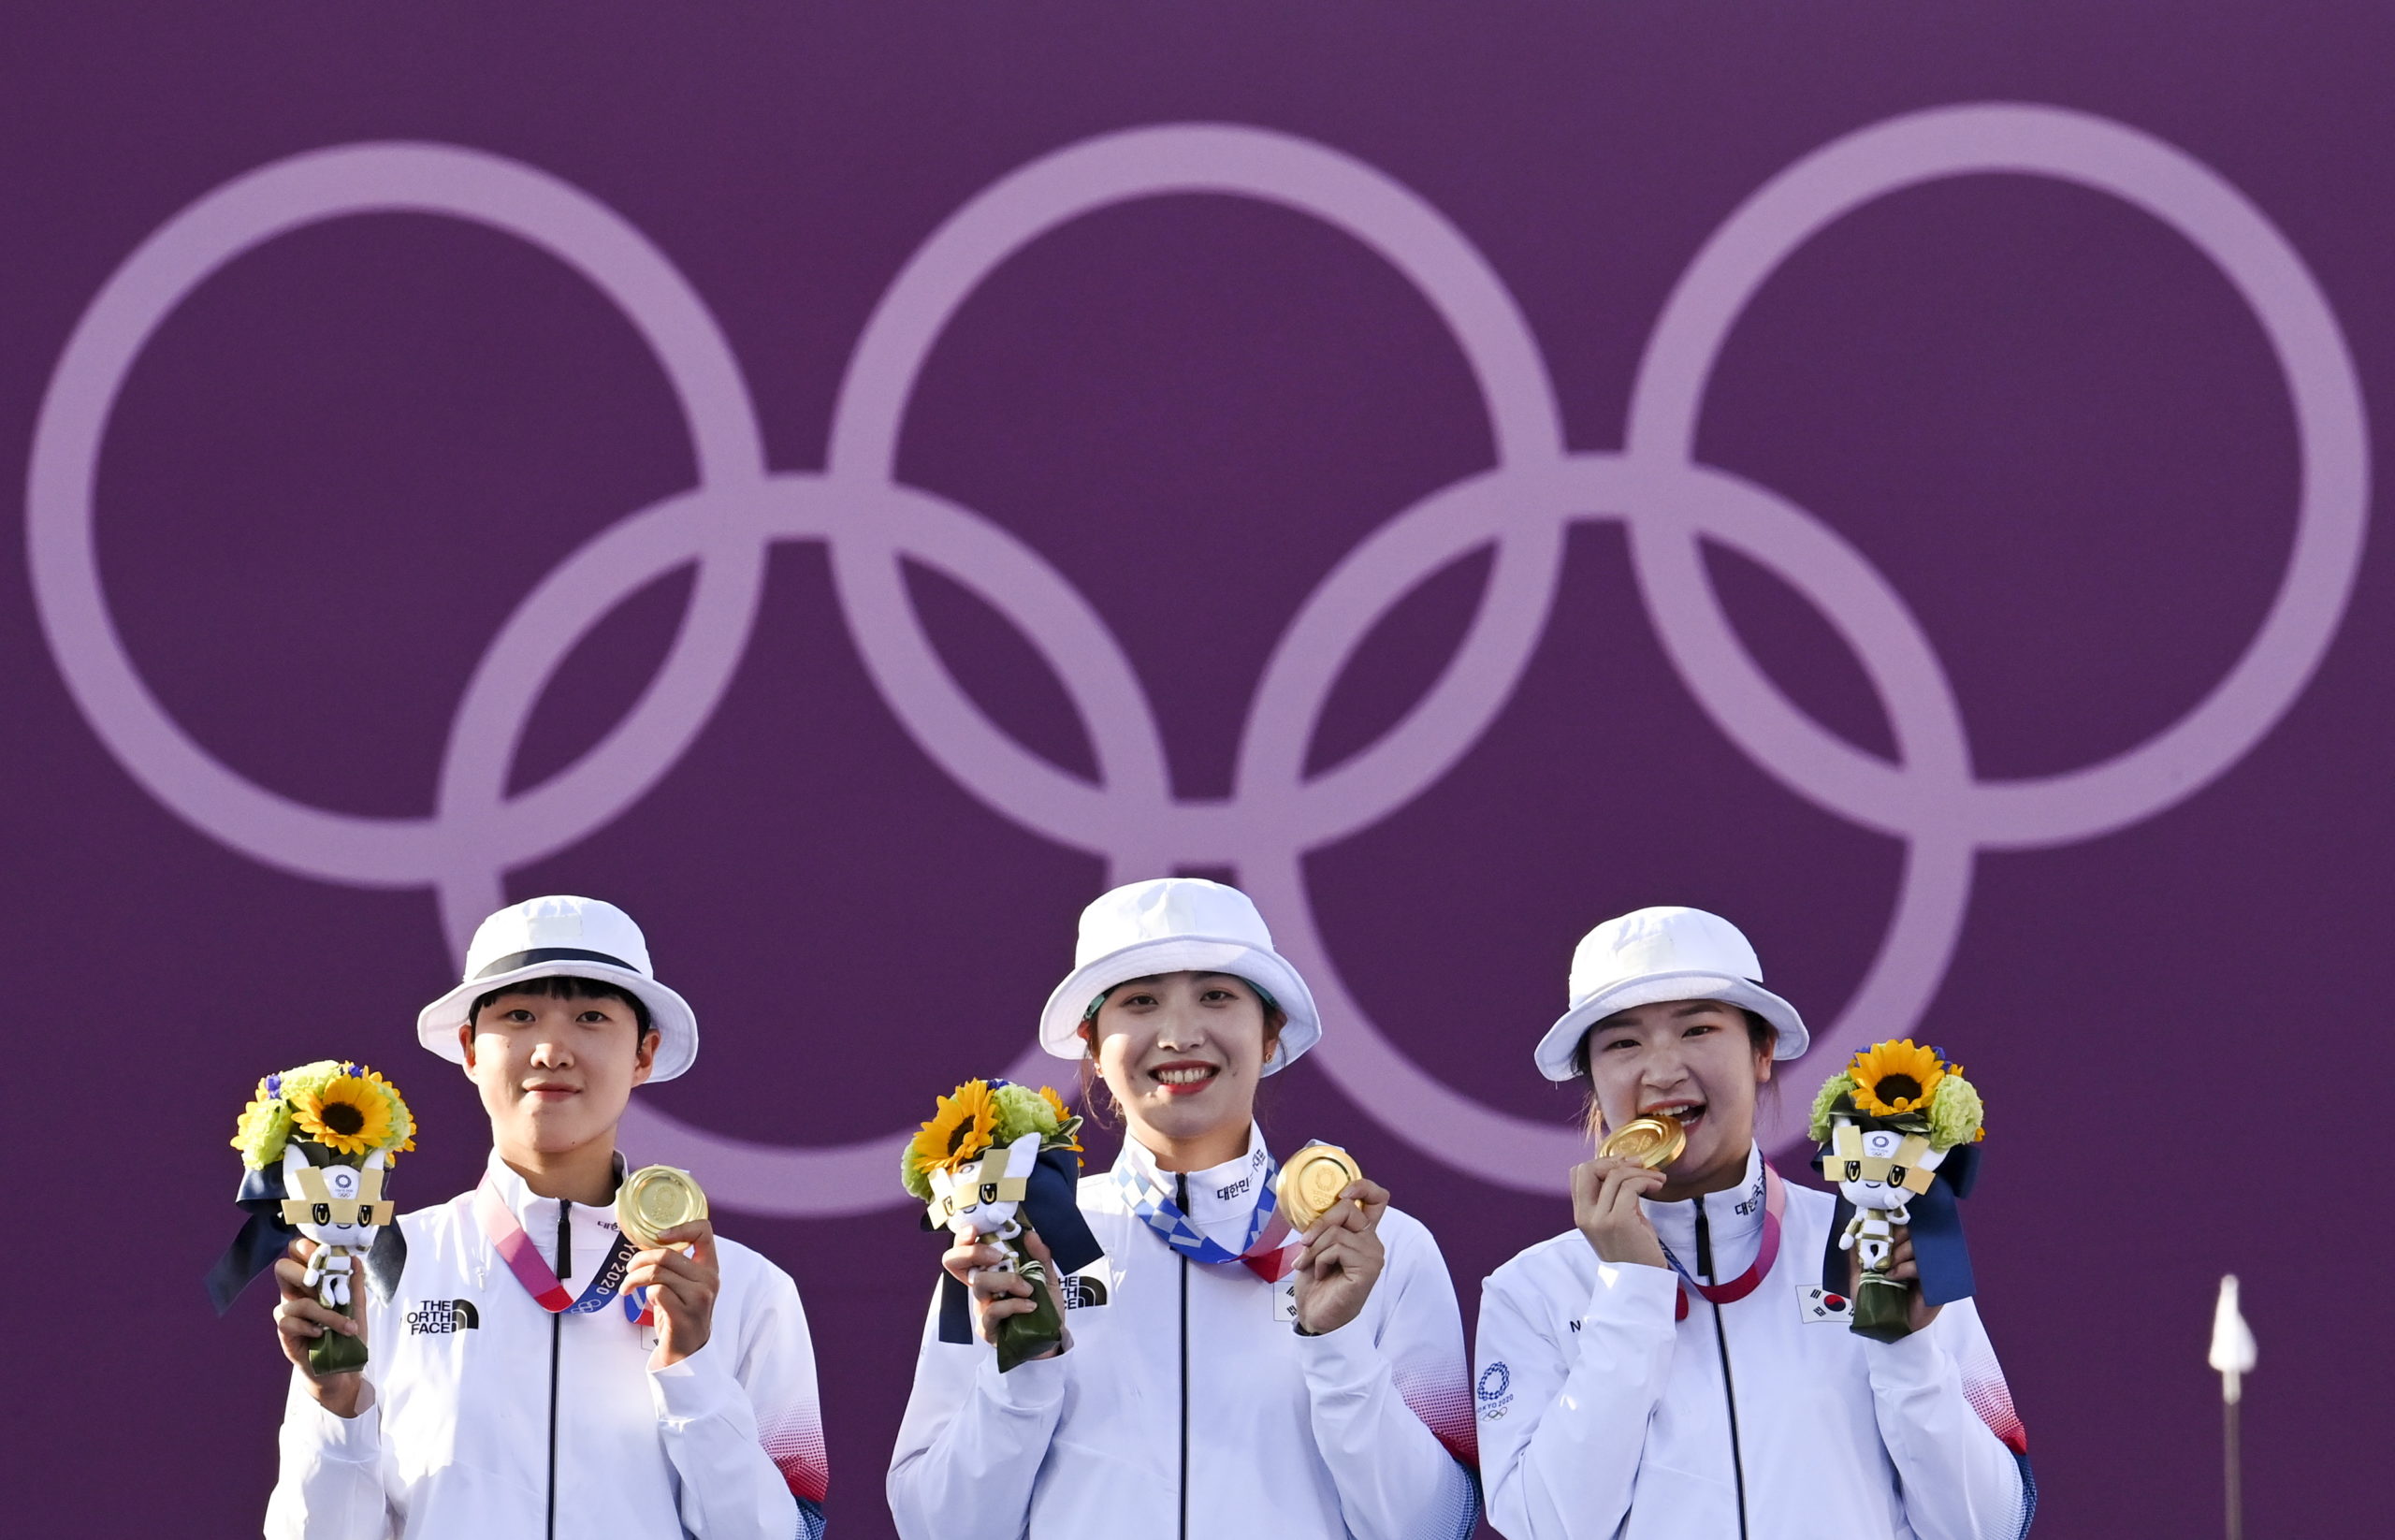 Gold medalist An San of South Korea, gold medallist Jang Minhee of South Korea and gold medallist Kang Chae Young of South Korea celebrate on the podium. 